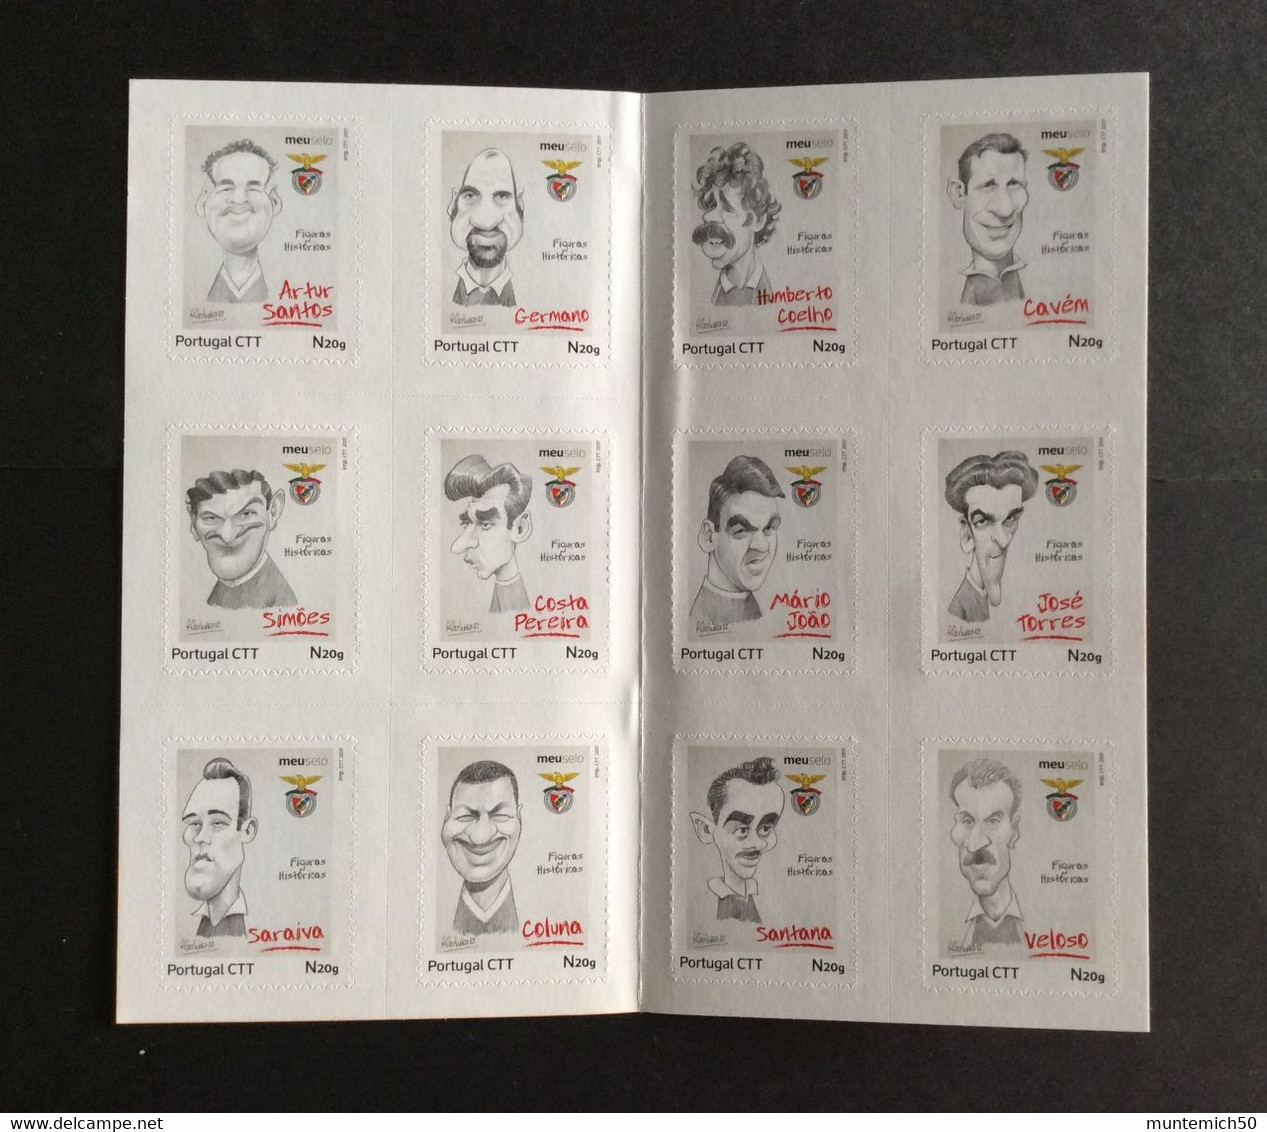 Portugal 2017-19 Benfica Historical Great Players Complete Booklets (1º 2º 3º Groups) MNH RARE - Carnets